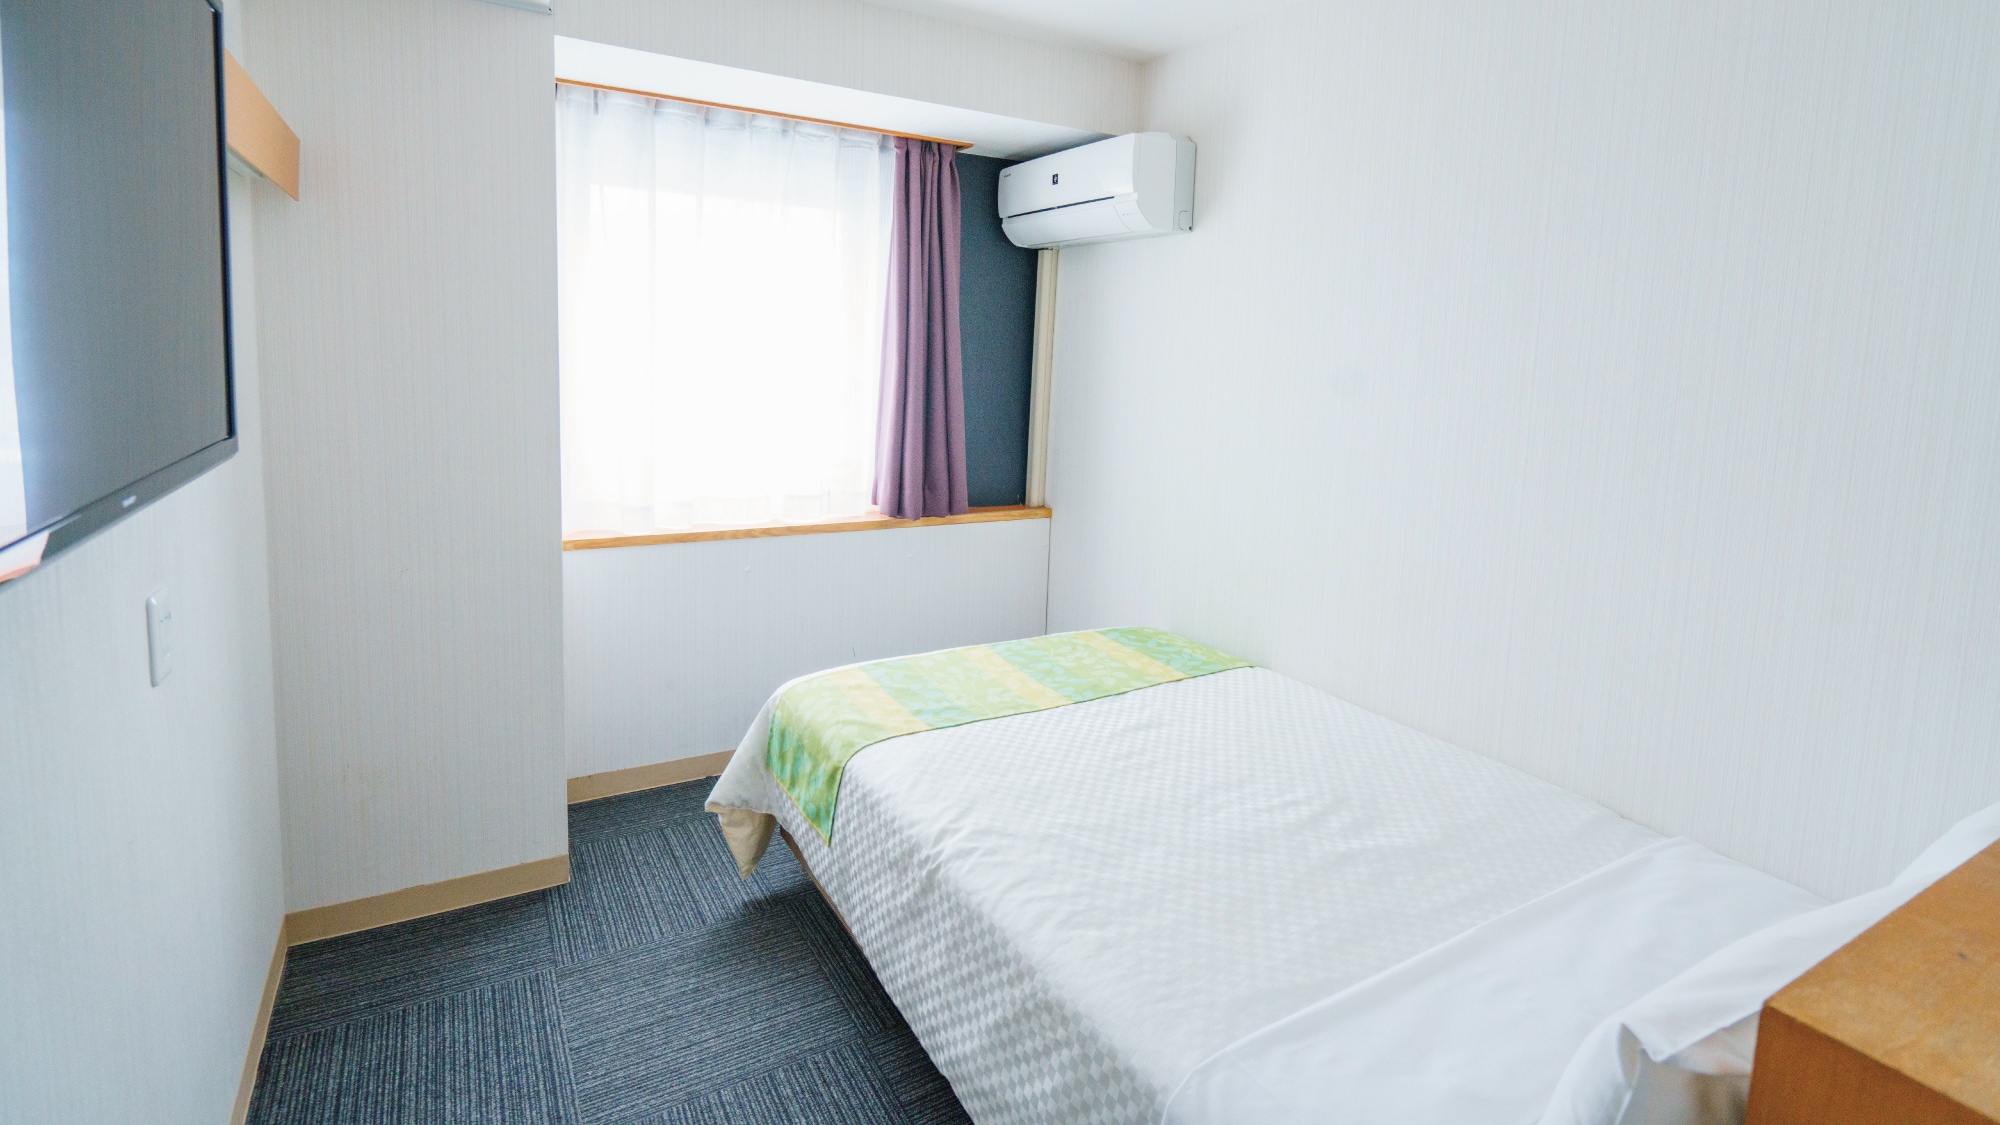 The semi-double room is a simple room and can accommodate up to 2 people sharing one bed.